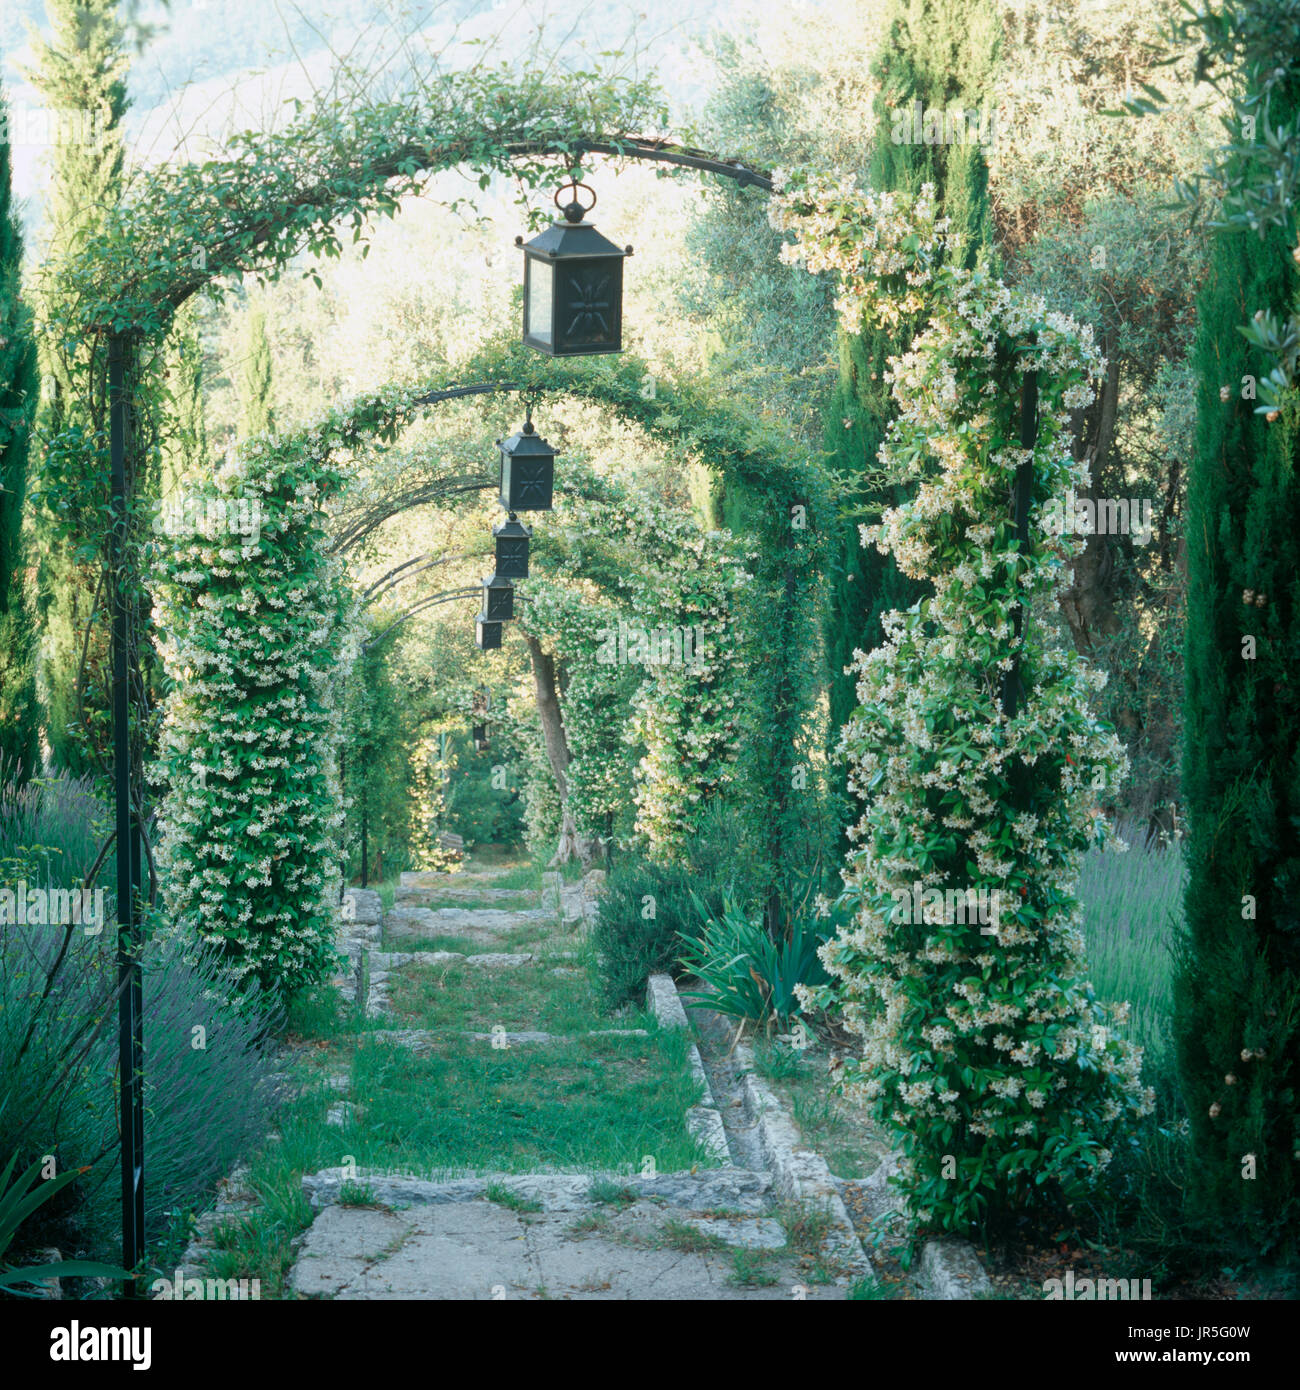 Vines over arches with lanterns Stock Photo